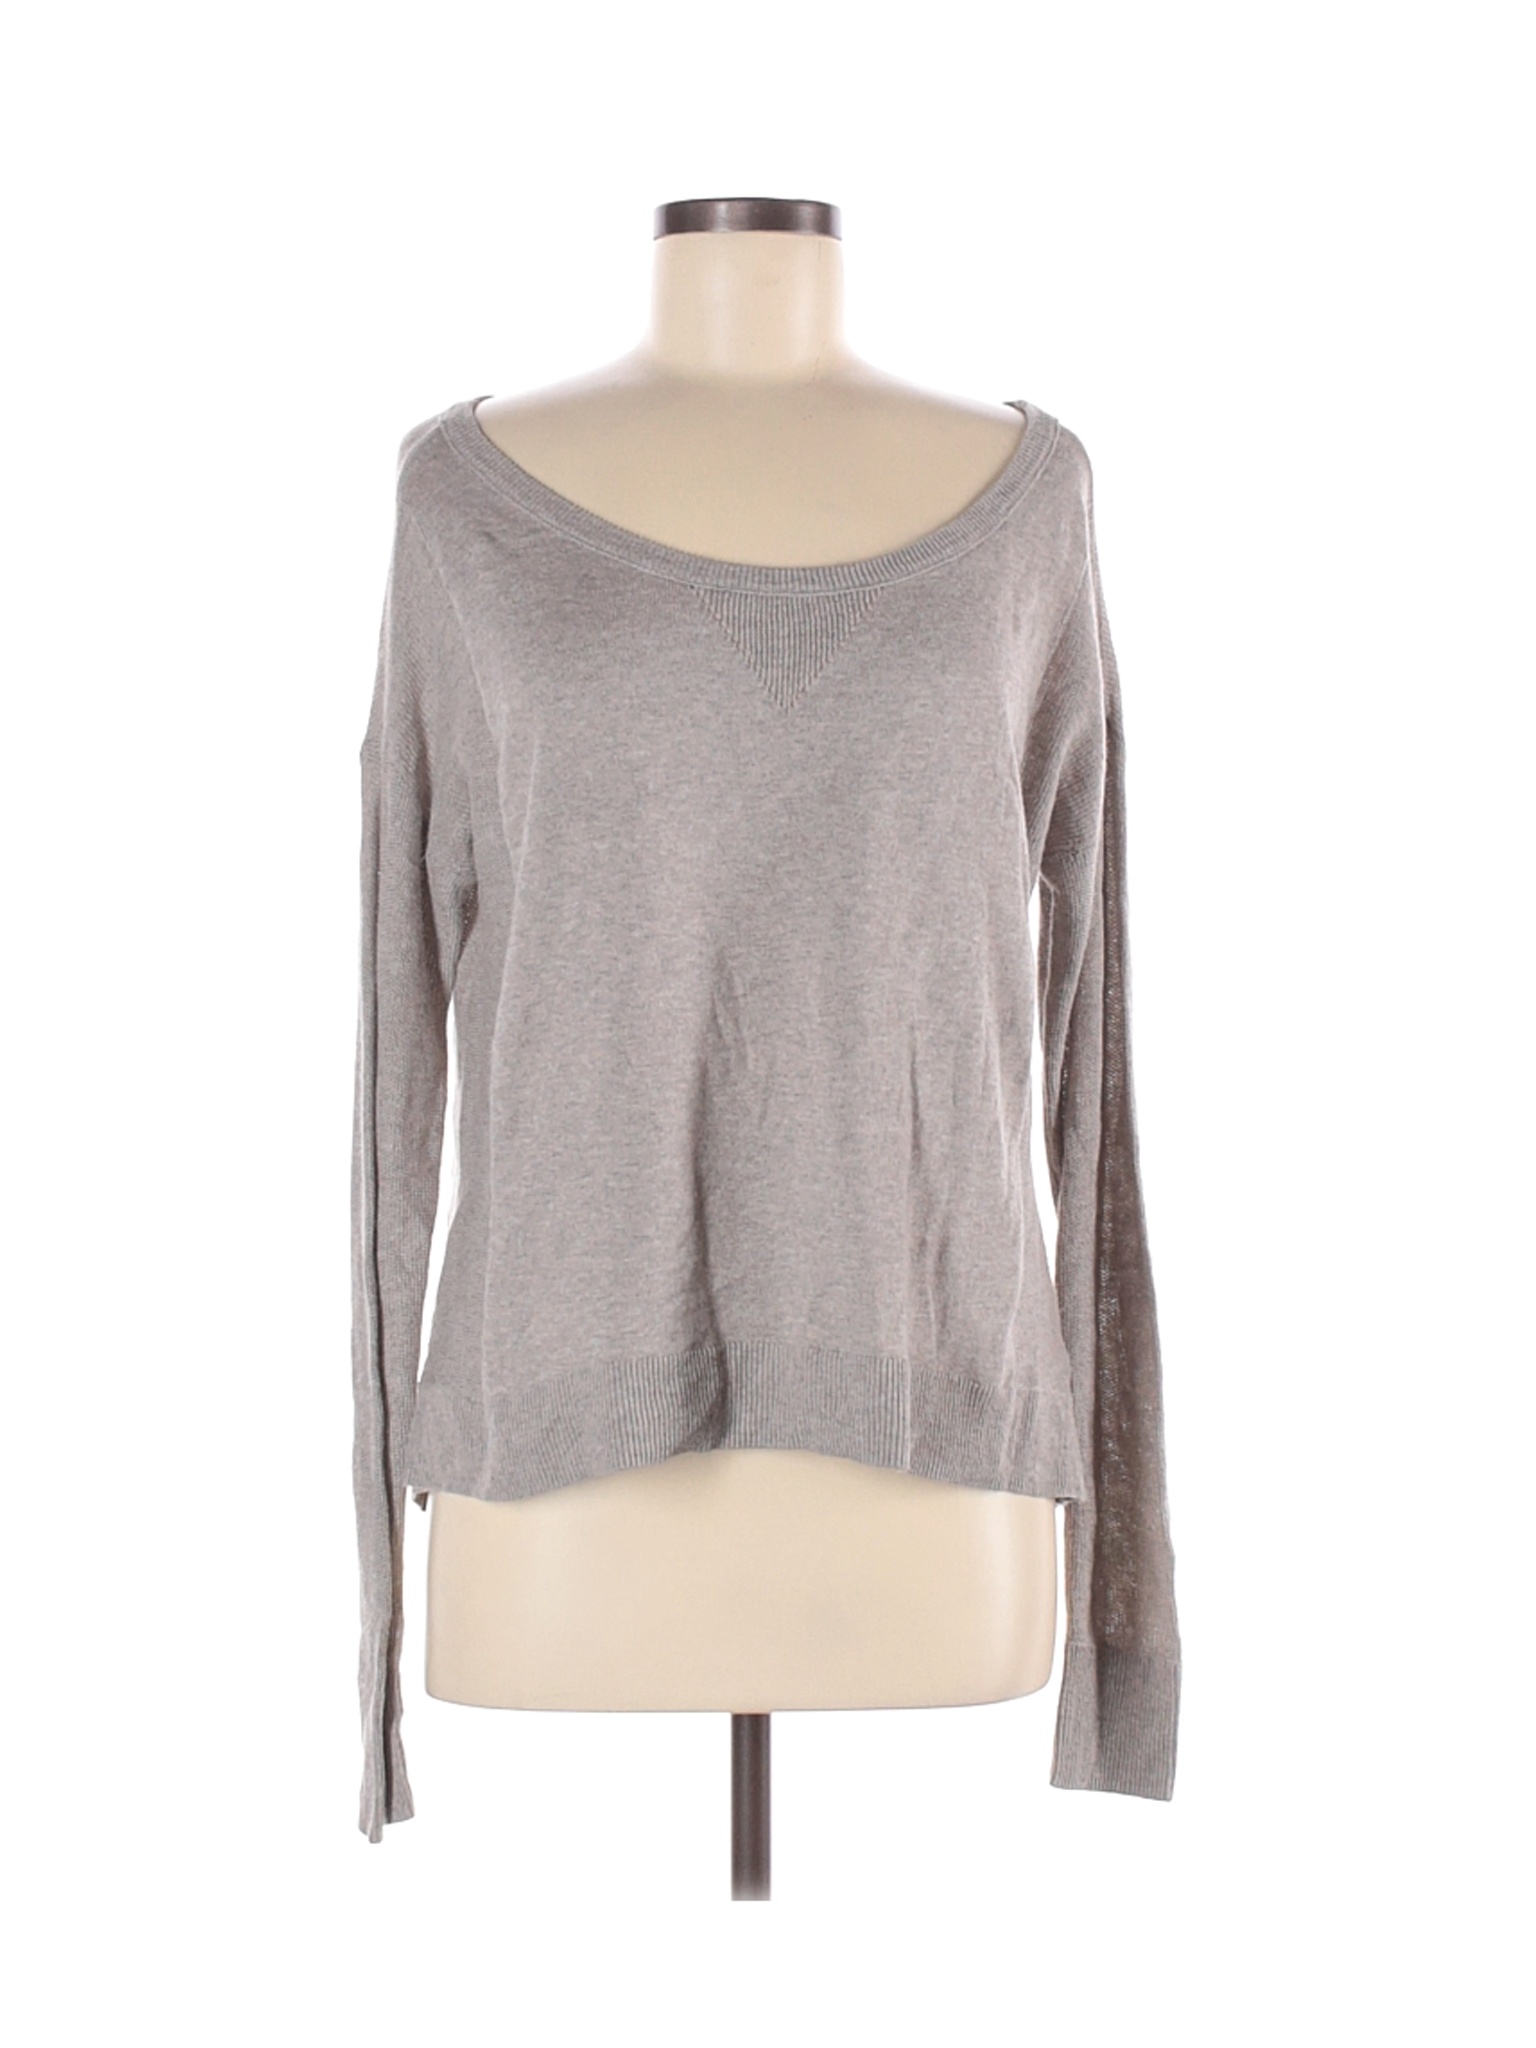 American Eagle Outfitters Women Gray Pullover Sweater M | eBay